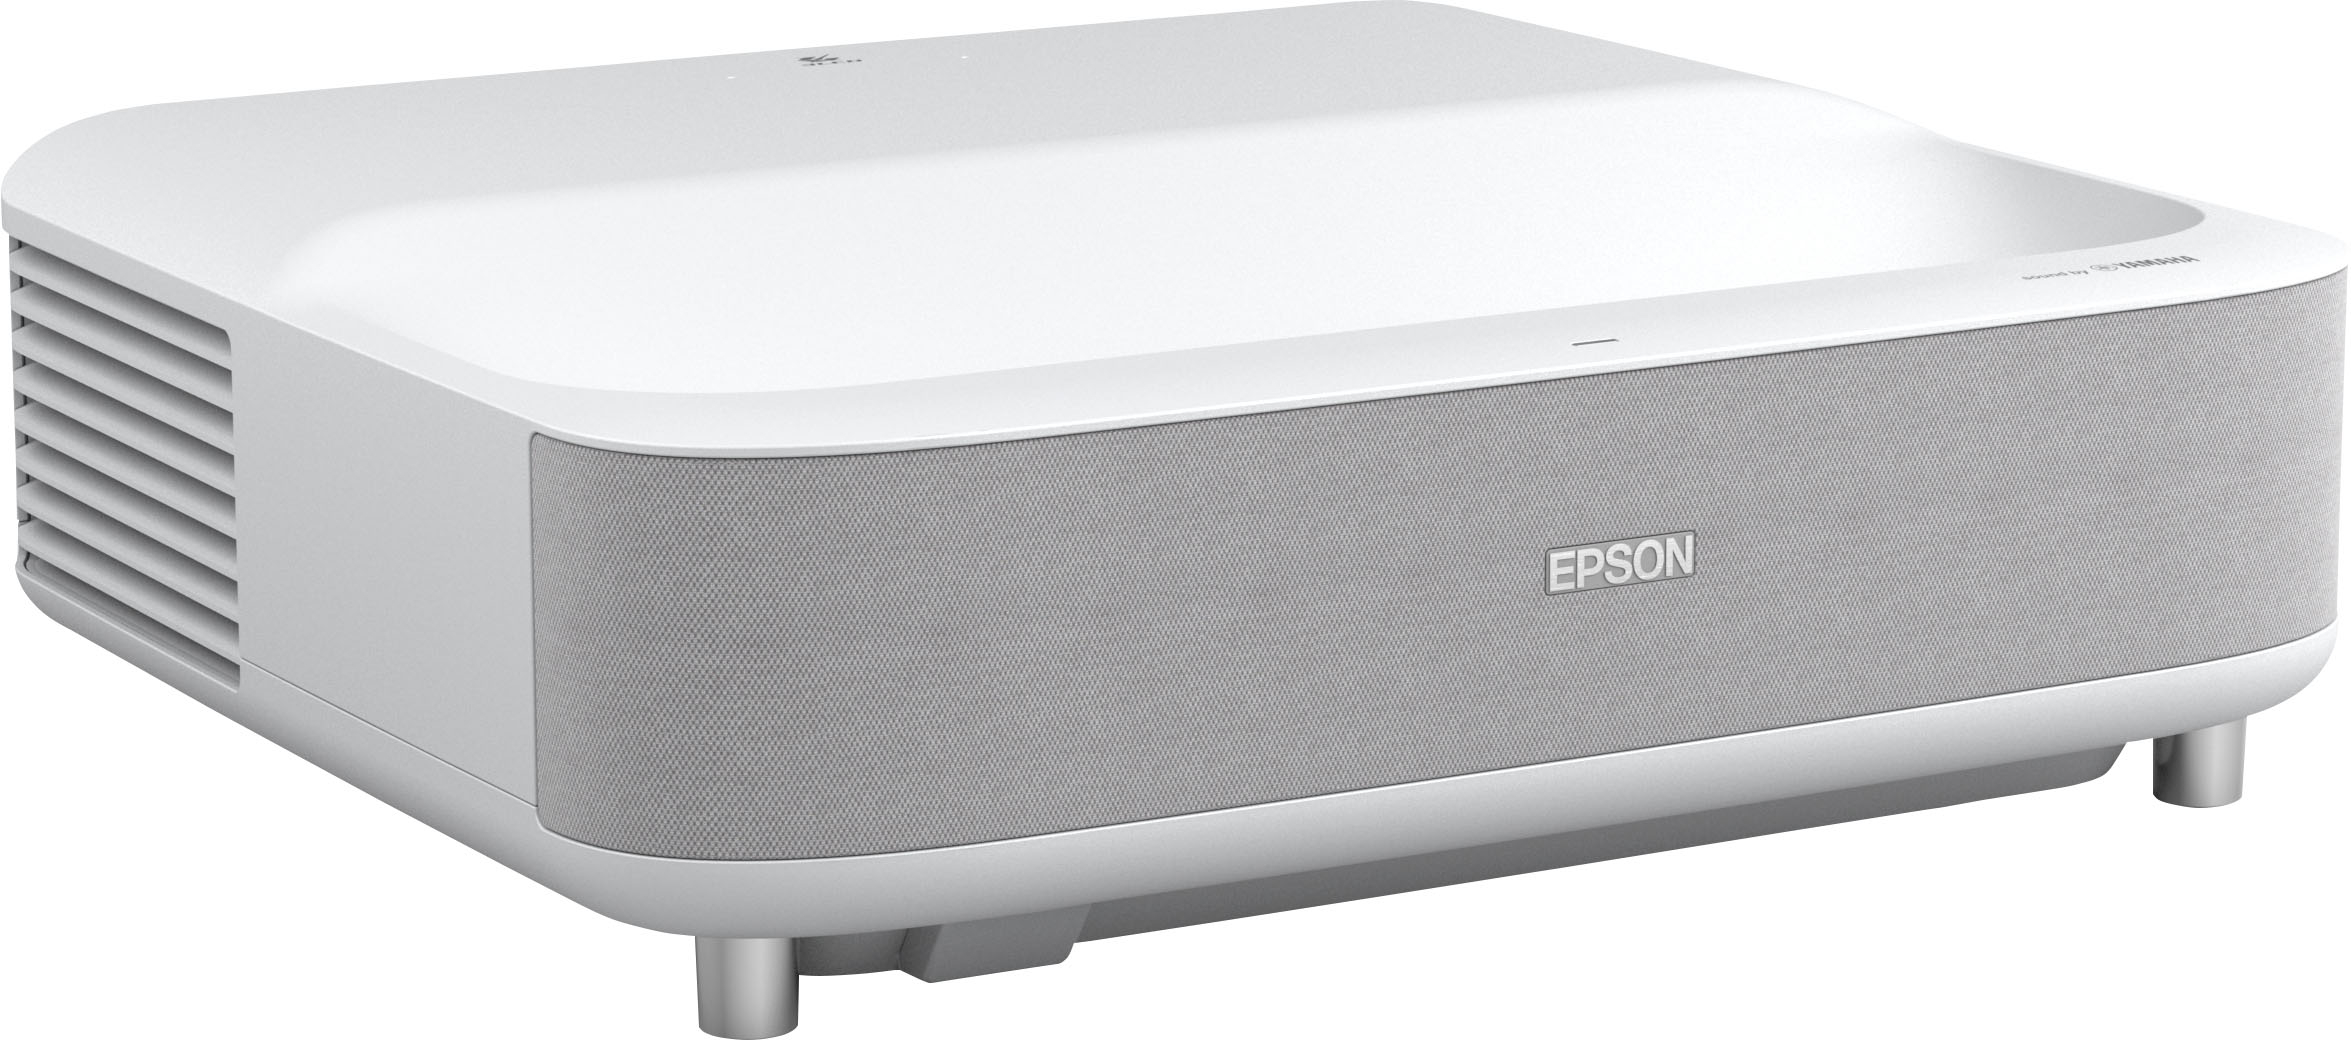 Angle View: Epson - EpiqVision Ultra LS300 Smart Streaming Laser Short Throw Projector, 3600 lumens - Certified Refurbished - White